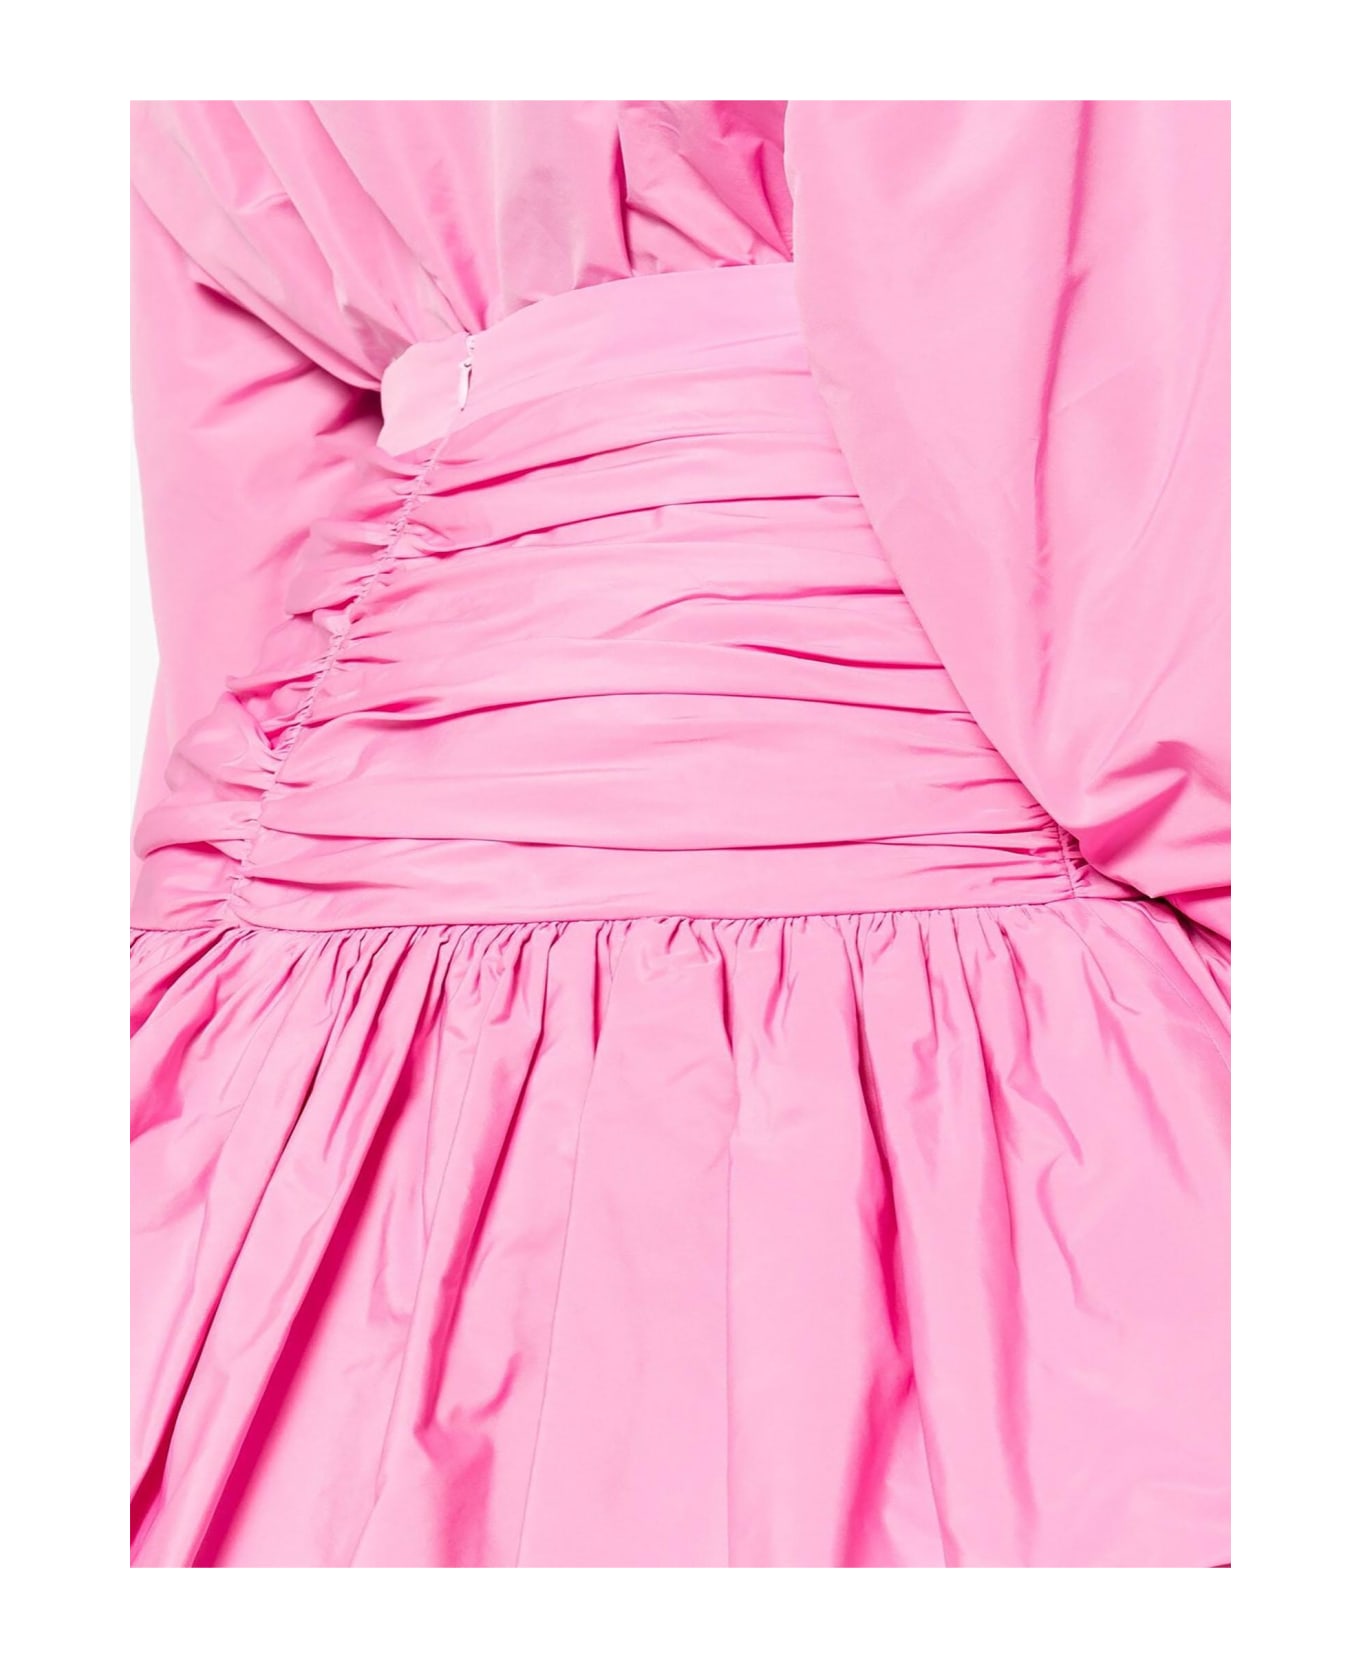 Patou Pink Recycled Polyester Faille Skirt - Pink